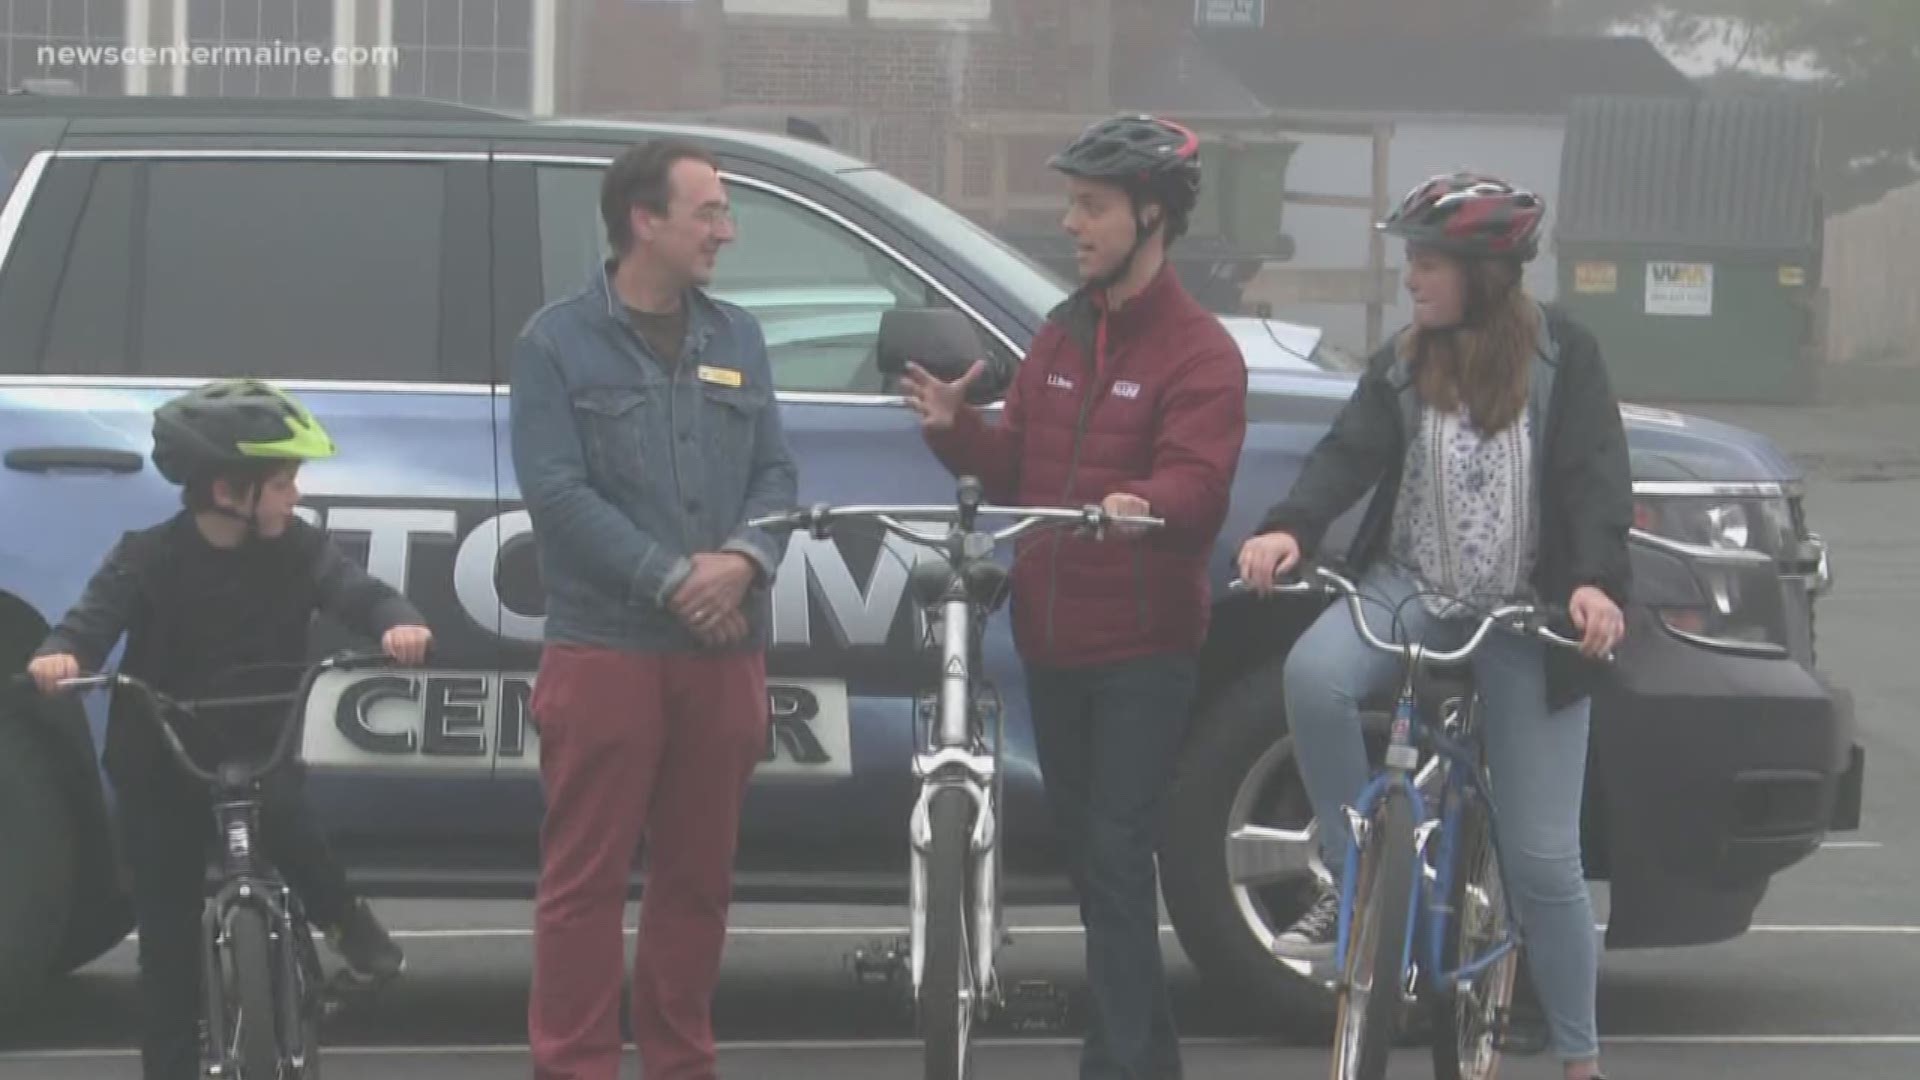 Cory Fromkin reports on National Bike to School Day